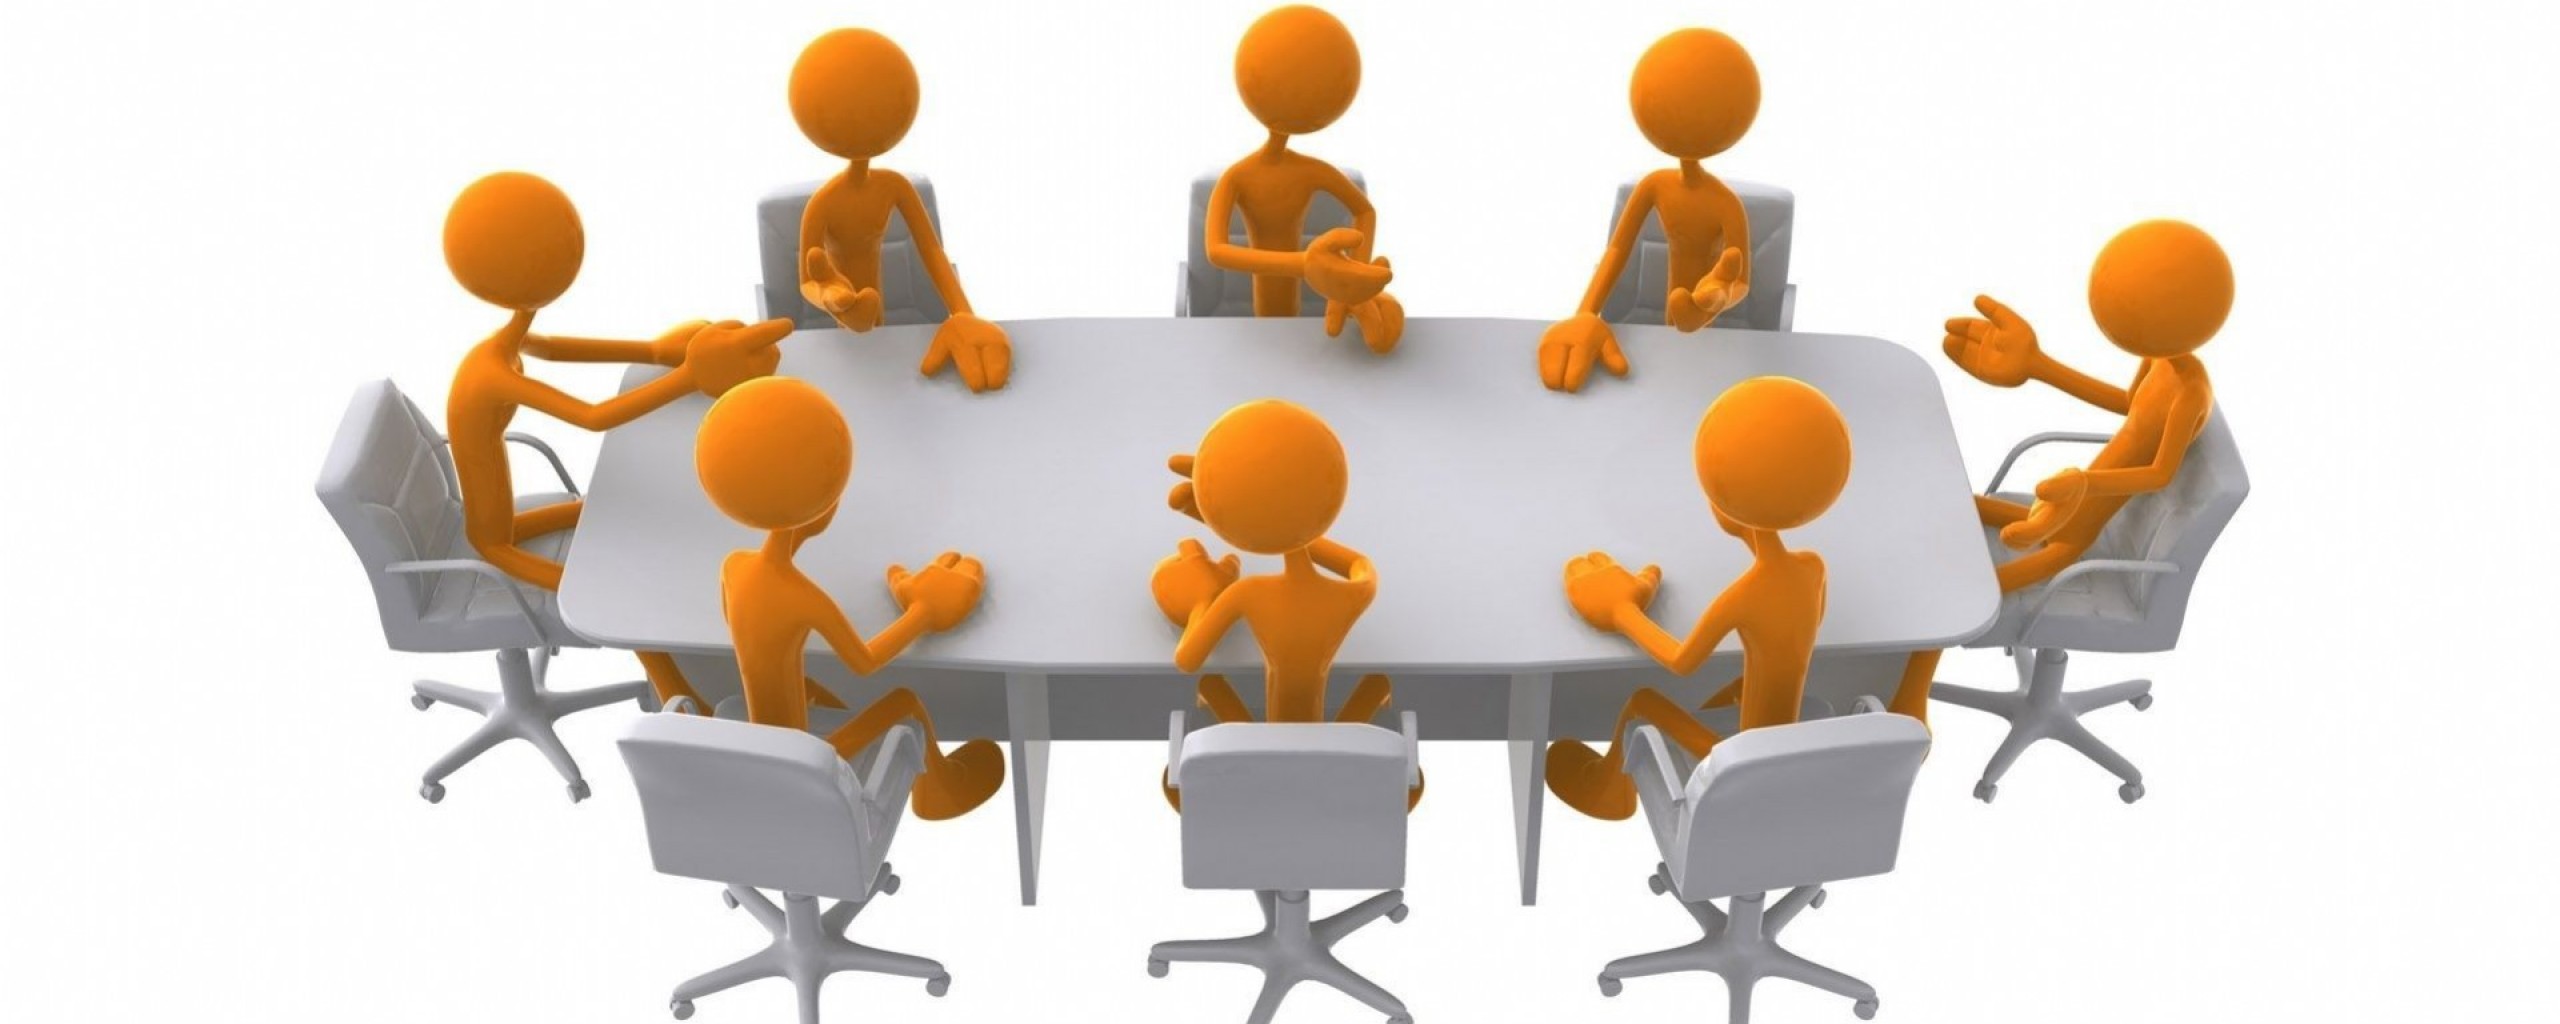 Meeting clipart free clipart image image